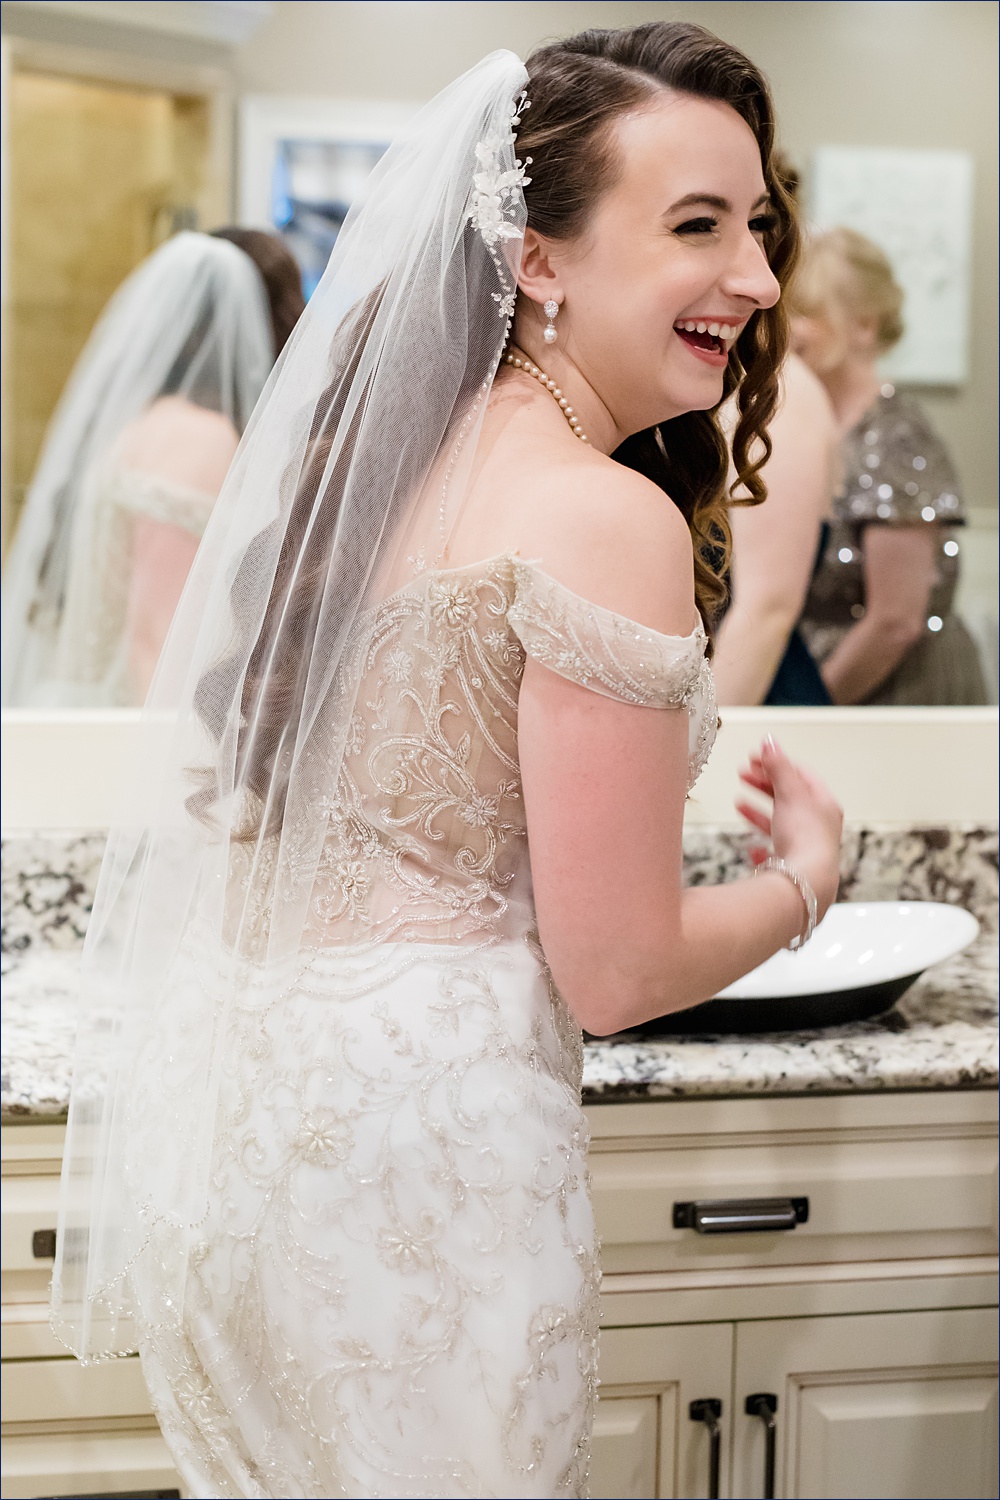 The bride laughs after getting into her modern wedding day dress